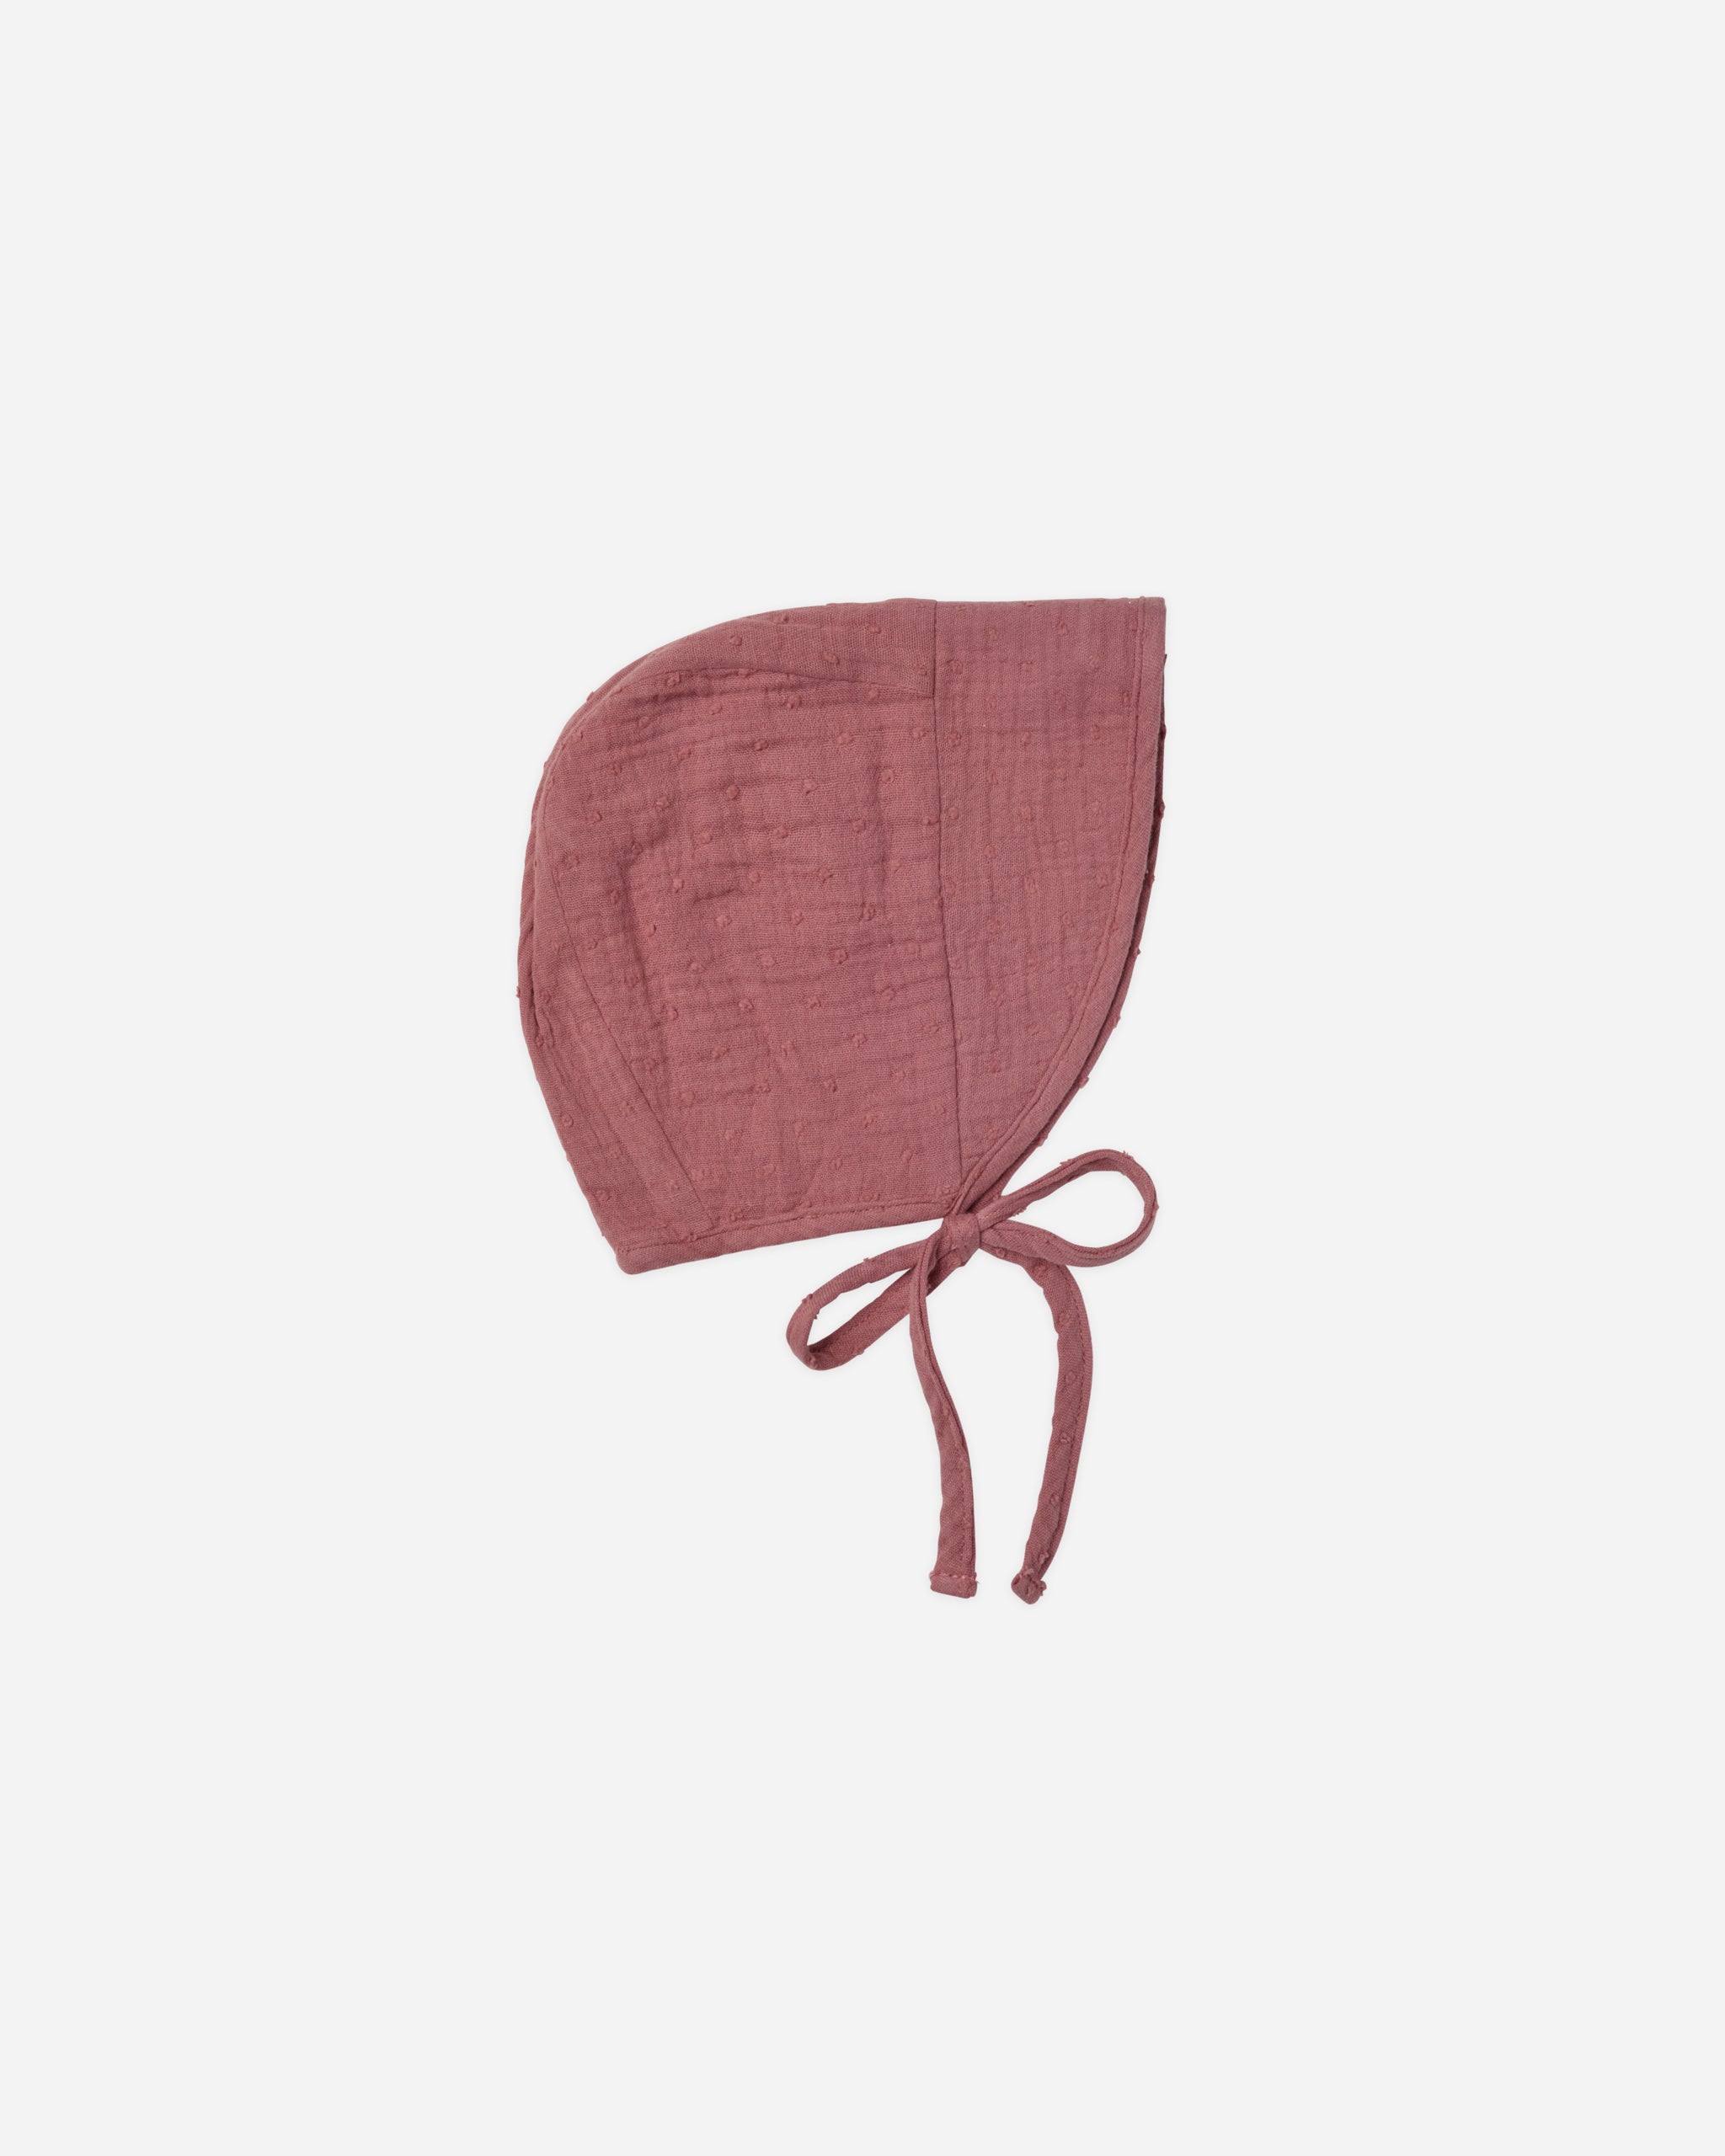 Brimmed Bonnet | Raspberry - Rylee + Cru | Kids Clothes | Trendy Baby Clothes | Modern Infant Outfits |